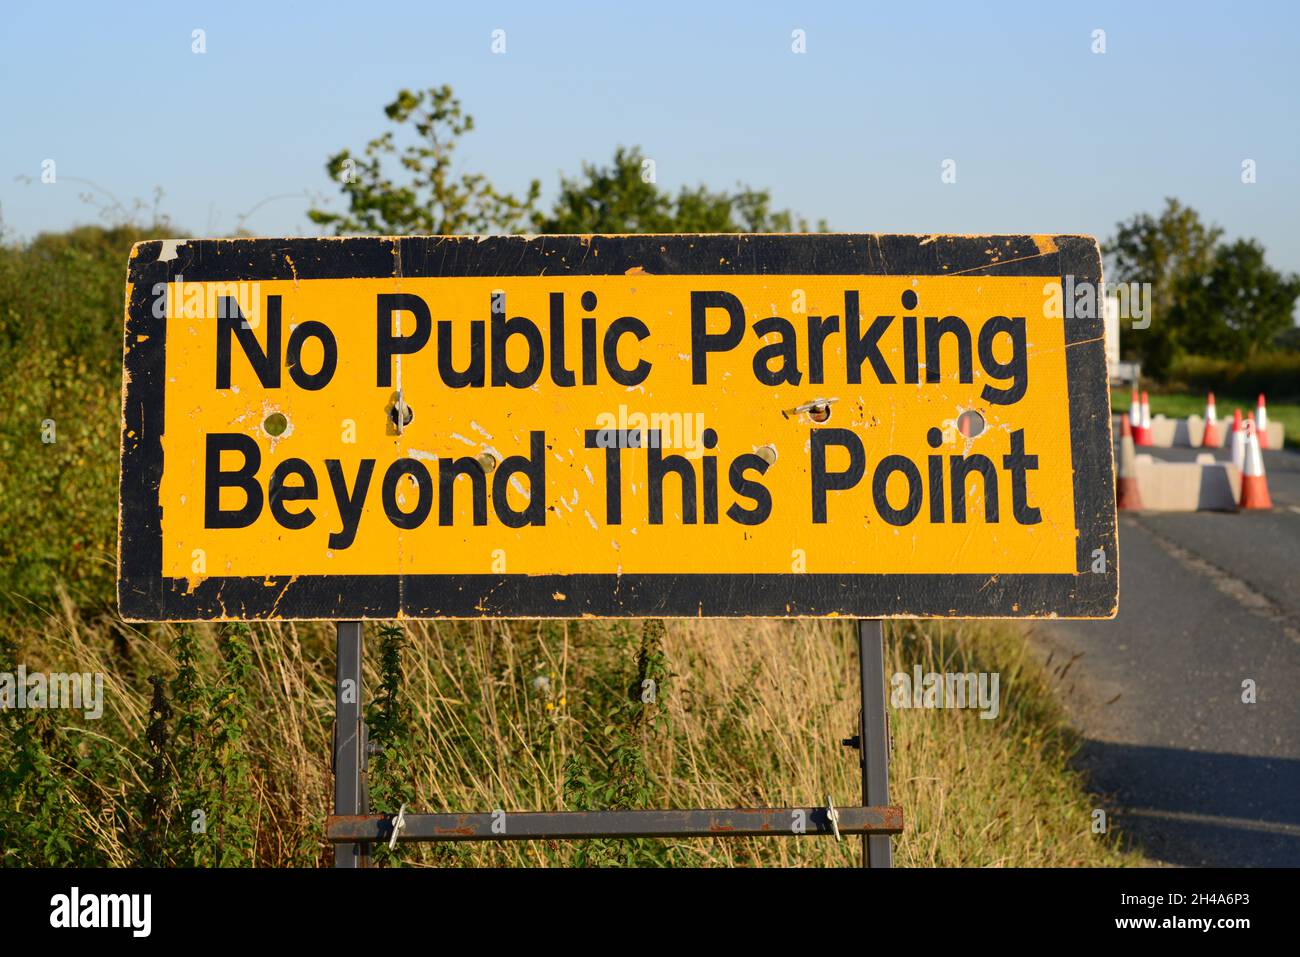 warning sign of no public parking in road ahead york united kingdom Stock Photo